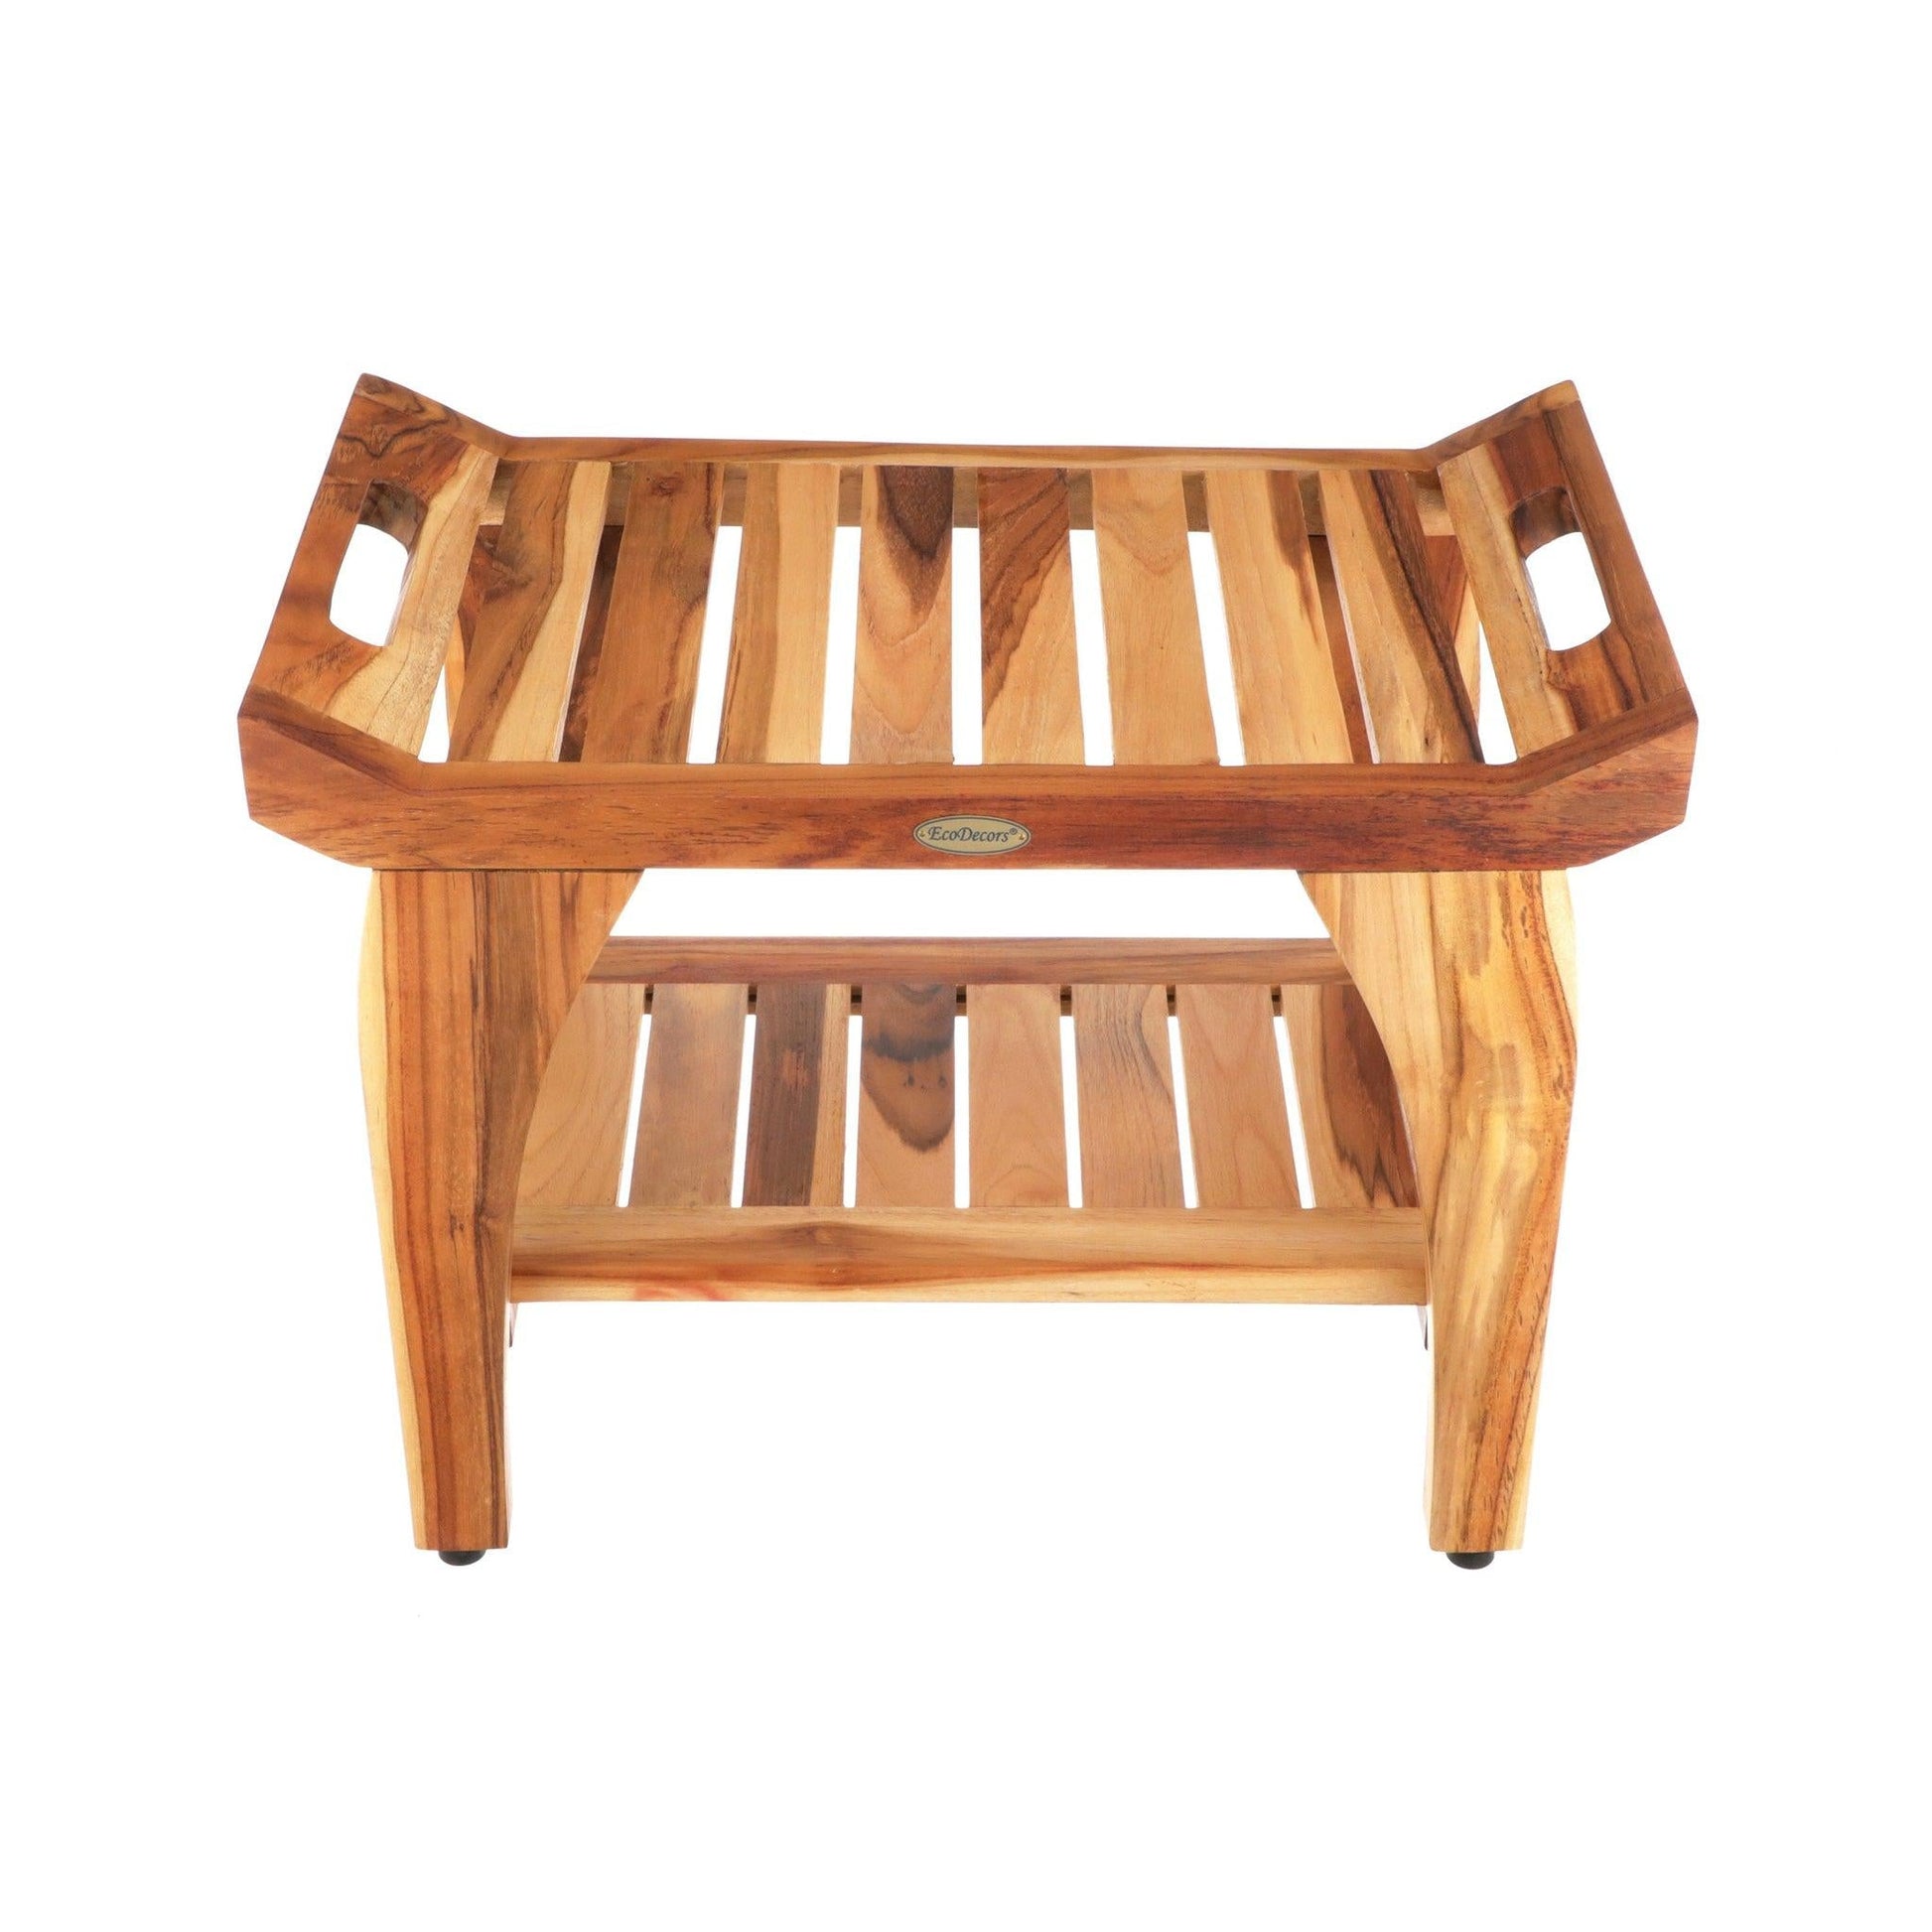 https://usbathstore.com/cdn/shop/files/EcoDecors-Tranquility-24-EarthyTeak-Solid-Teak-Wood-Shower-Bench-With-Shelf-and-LiftAide-Arms.jpg?v=1694729253&width=1946